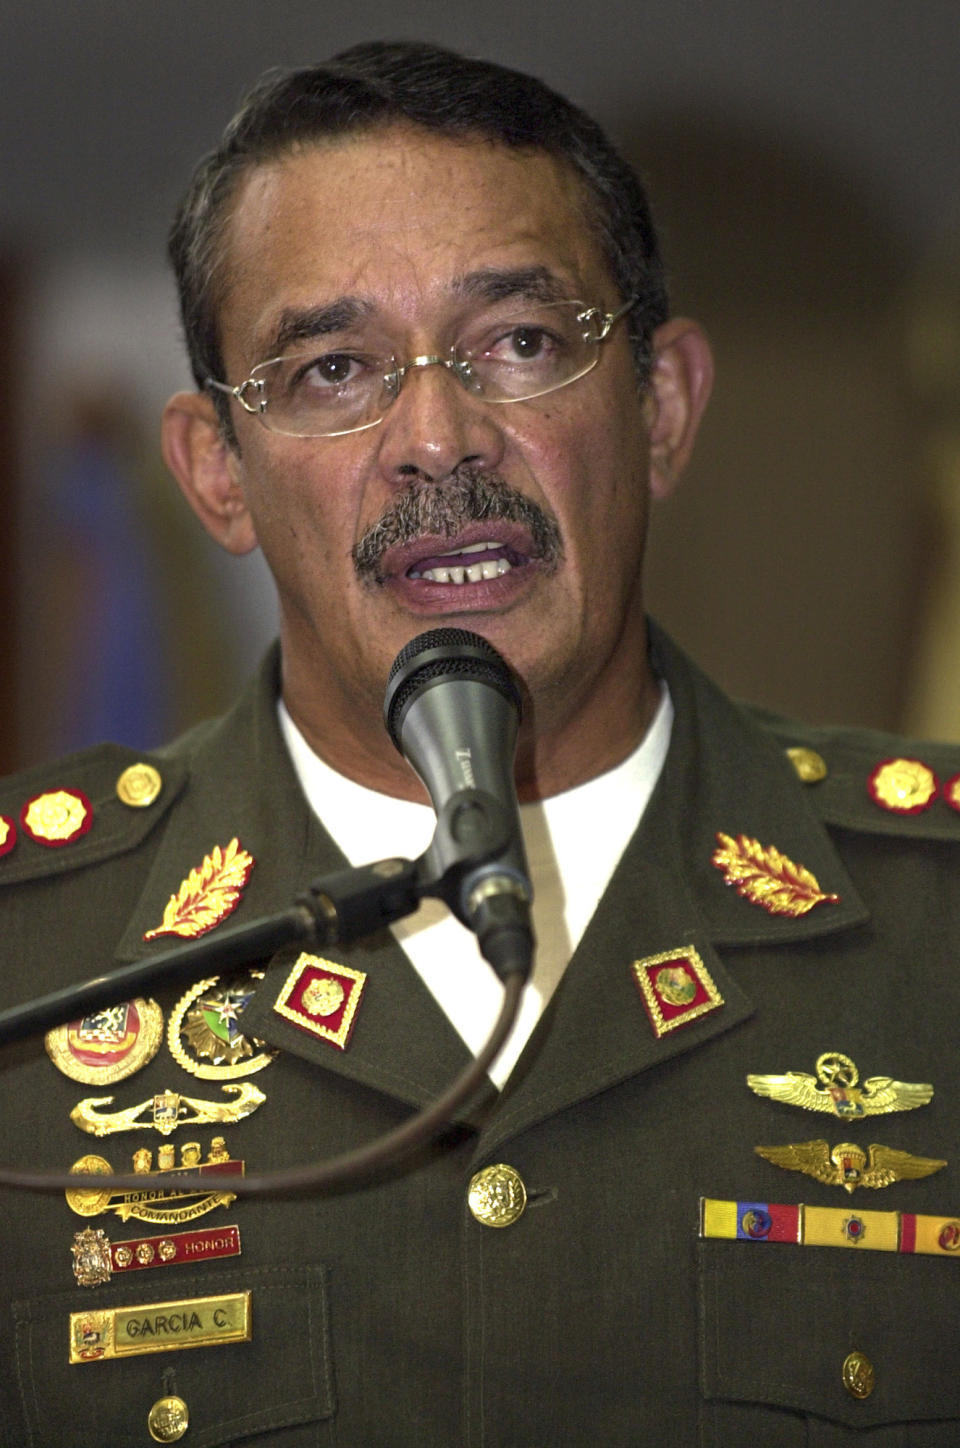 FILE - In his April 27, 2005 file photo, Venezuelan Defense Minister Jorge Garcia Carniero speaks to the press in the Defense Ministry in Ft. Tiuna in Caracas, Venezuela. Garcia Carniero, a Venezuelan state governor who once served as defense minister for former President Hugo Chavez has died, officials said Saturday, May 22, 2021. He was 69. (AP Photo/Leslie Mazoch, File)